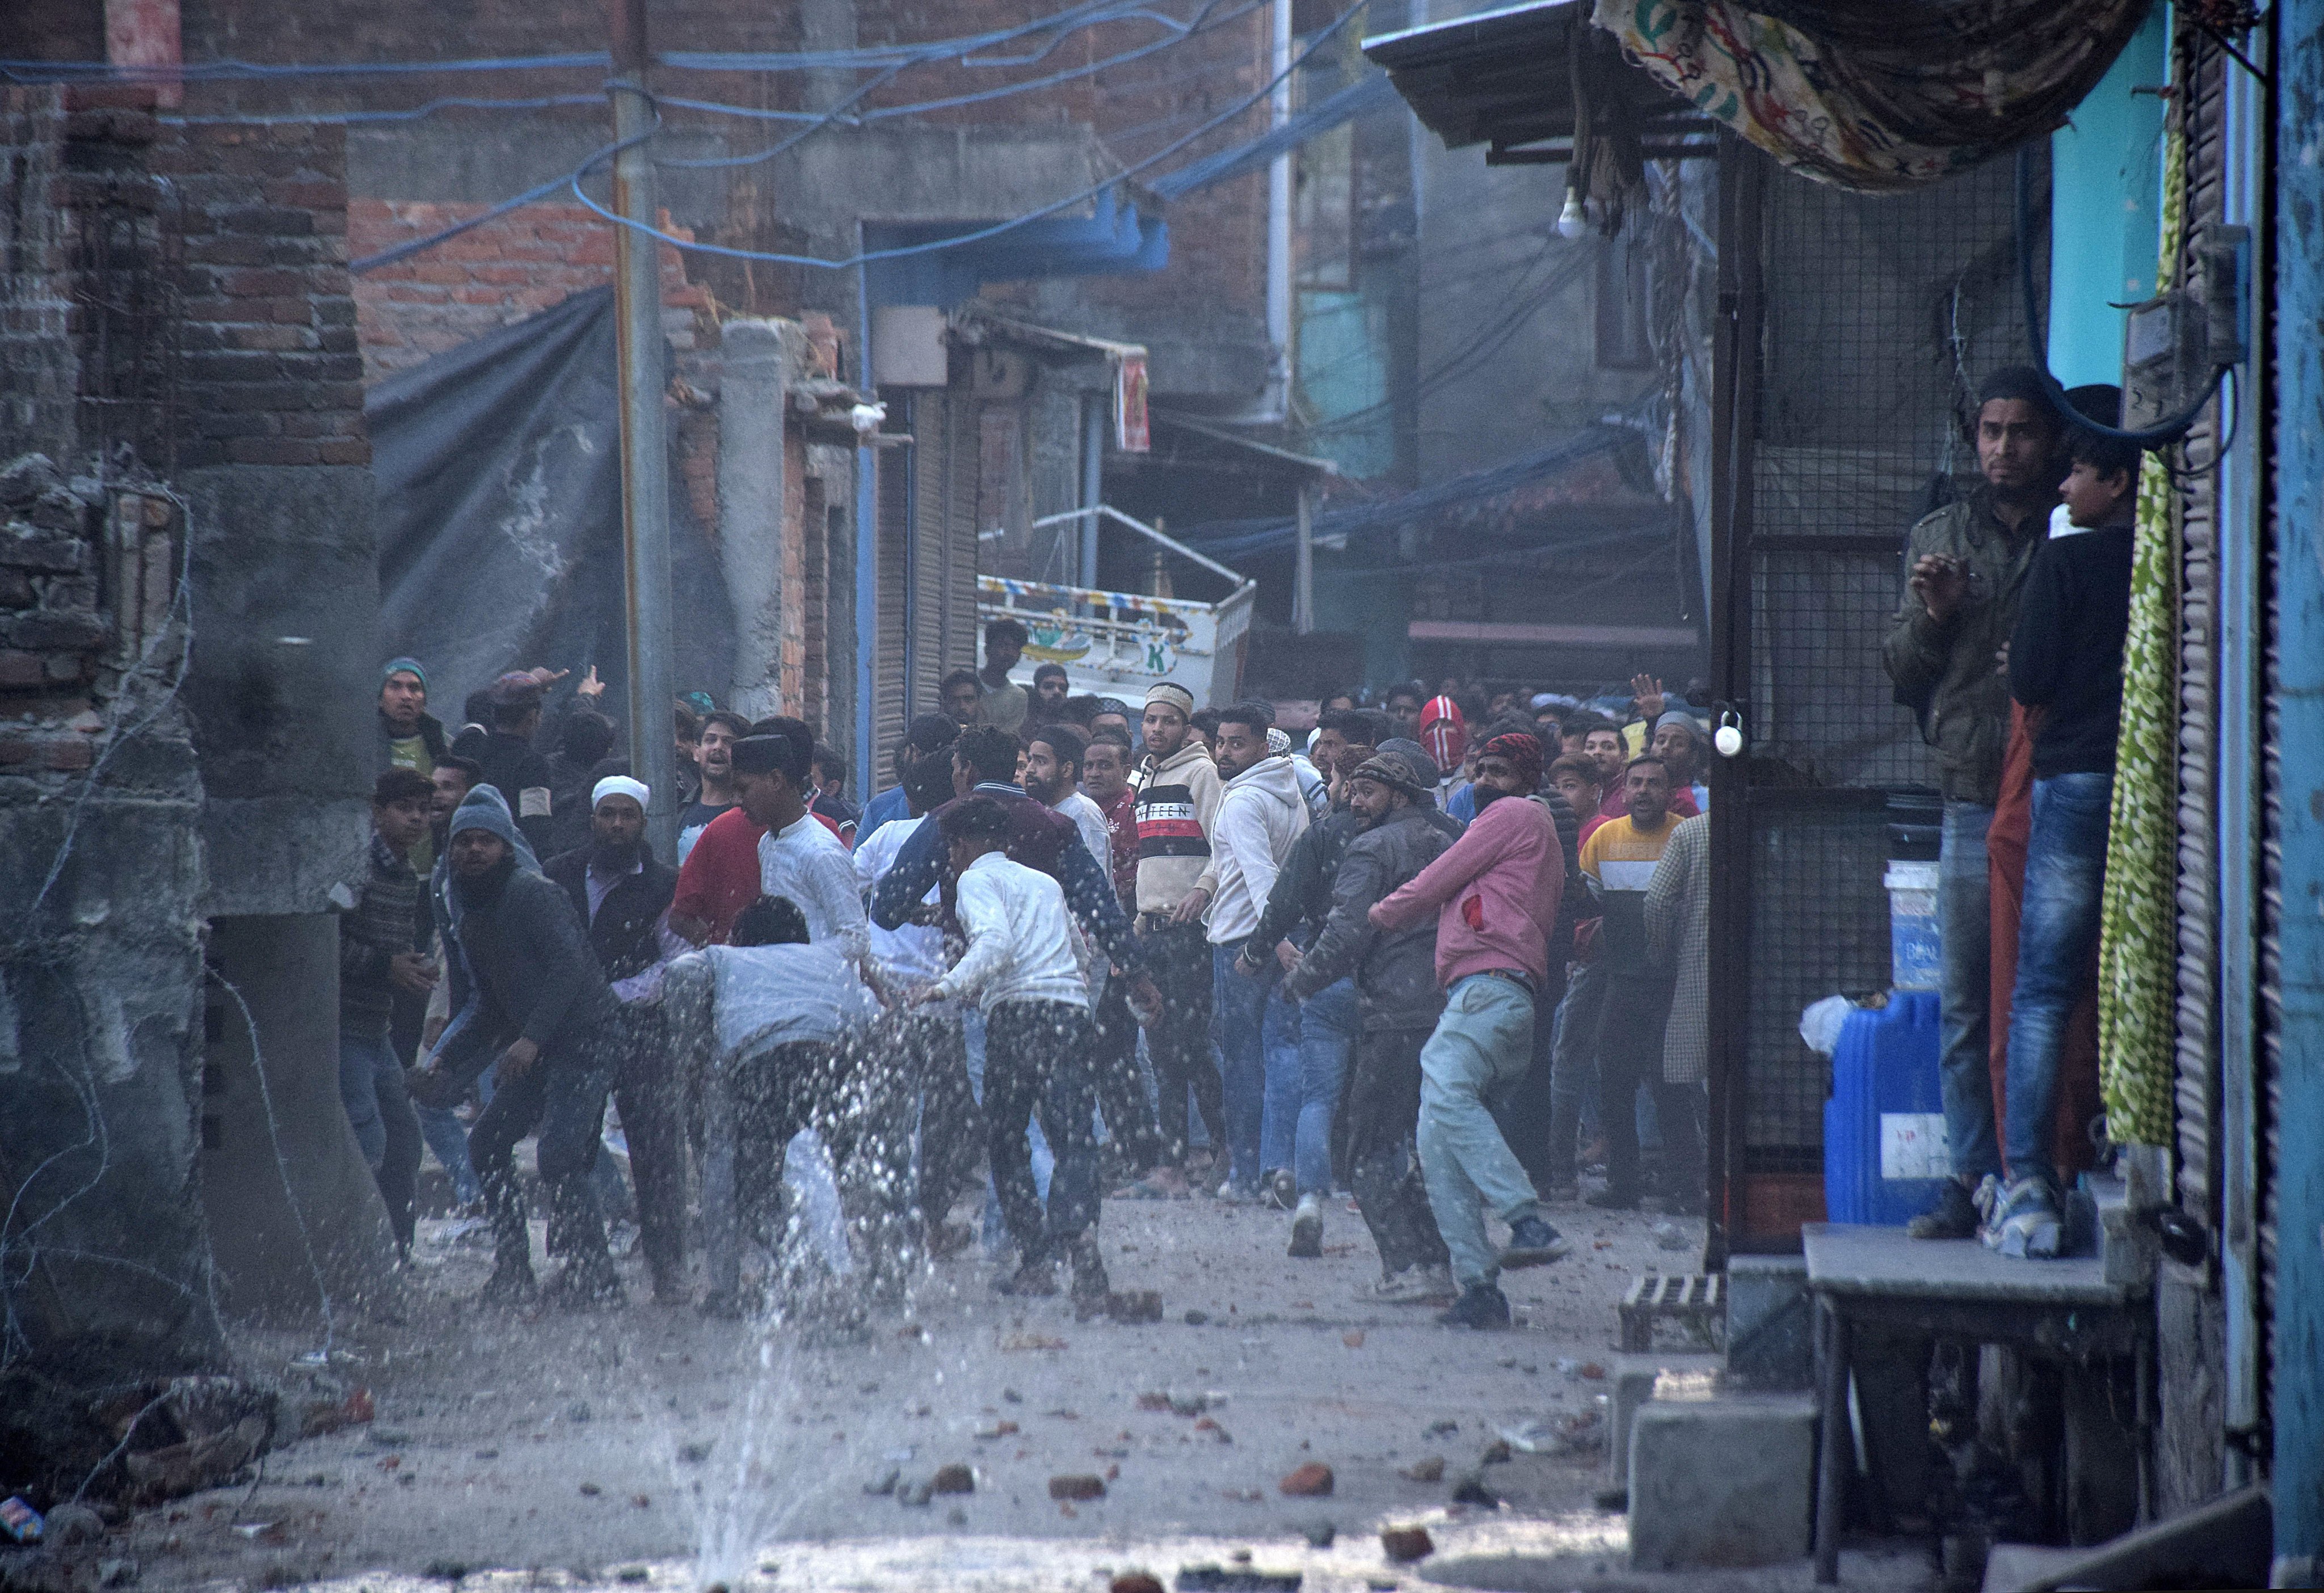 Demonstrators throw stones towards police during a protest against a government demolition drive in Haldwani, in the northern Indian state of Uttarakhand, on February 8. Photo: Reuters